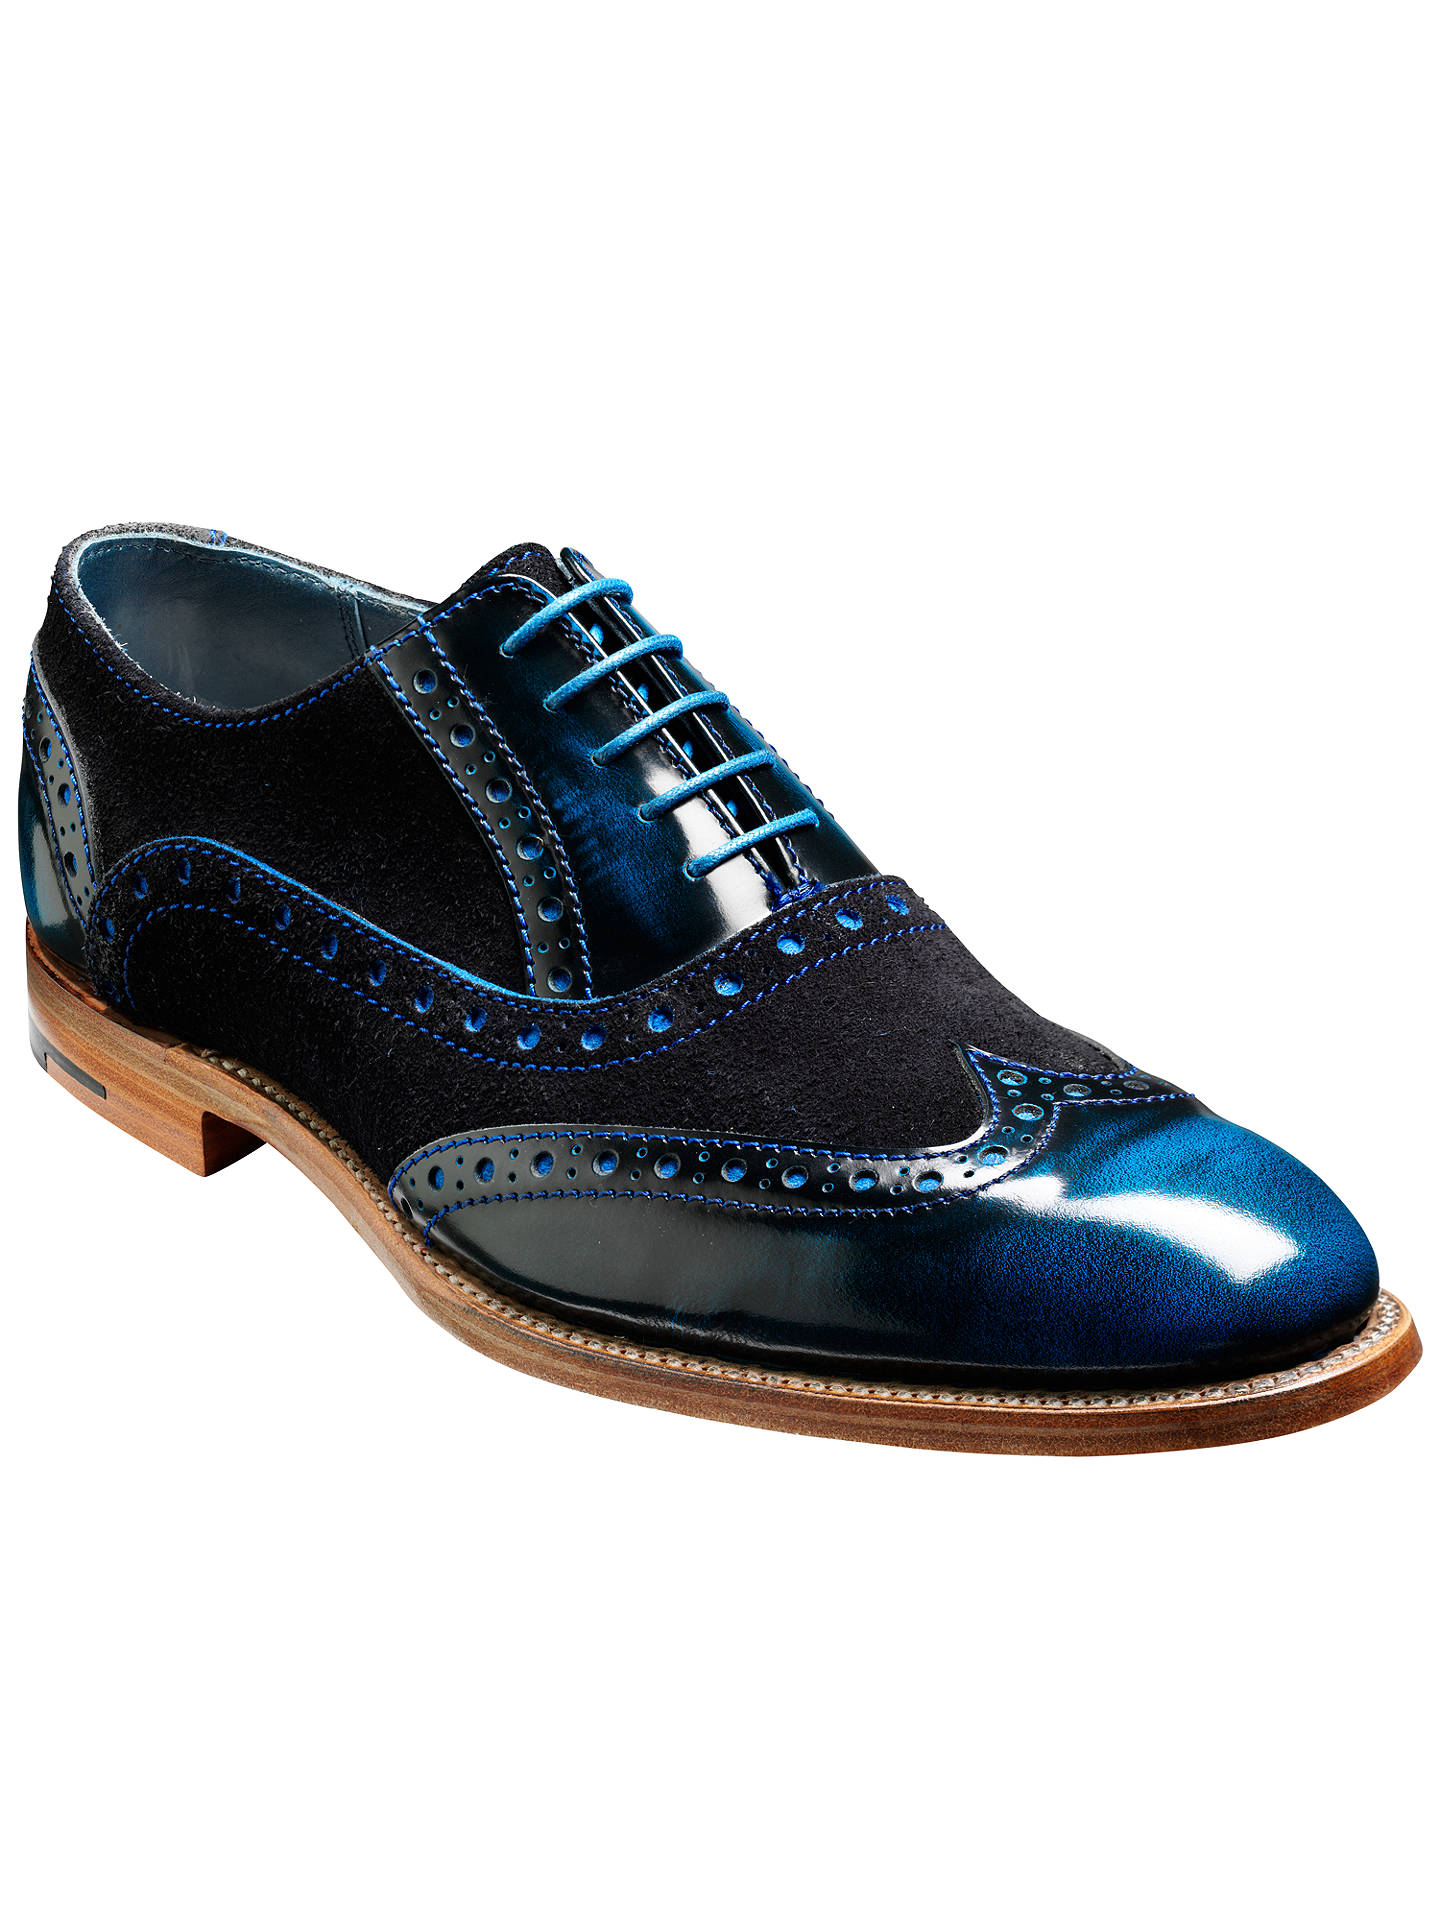 Barker Grant Calf Leather Brogue Shoes at John Lewis & Partners